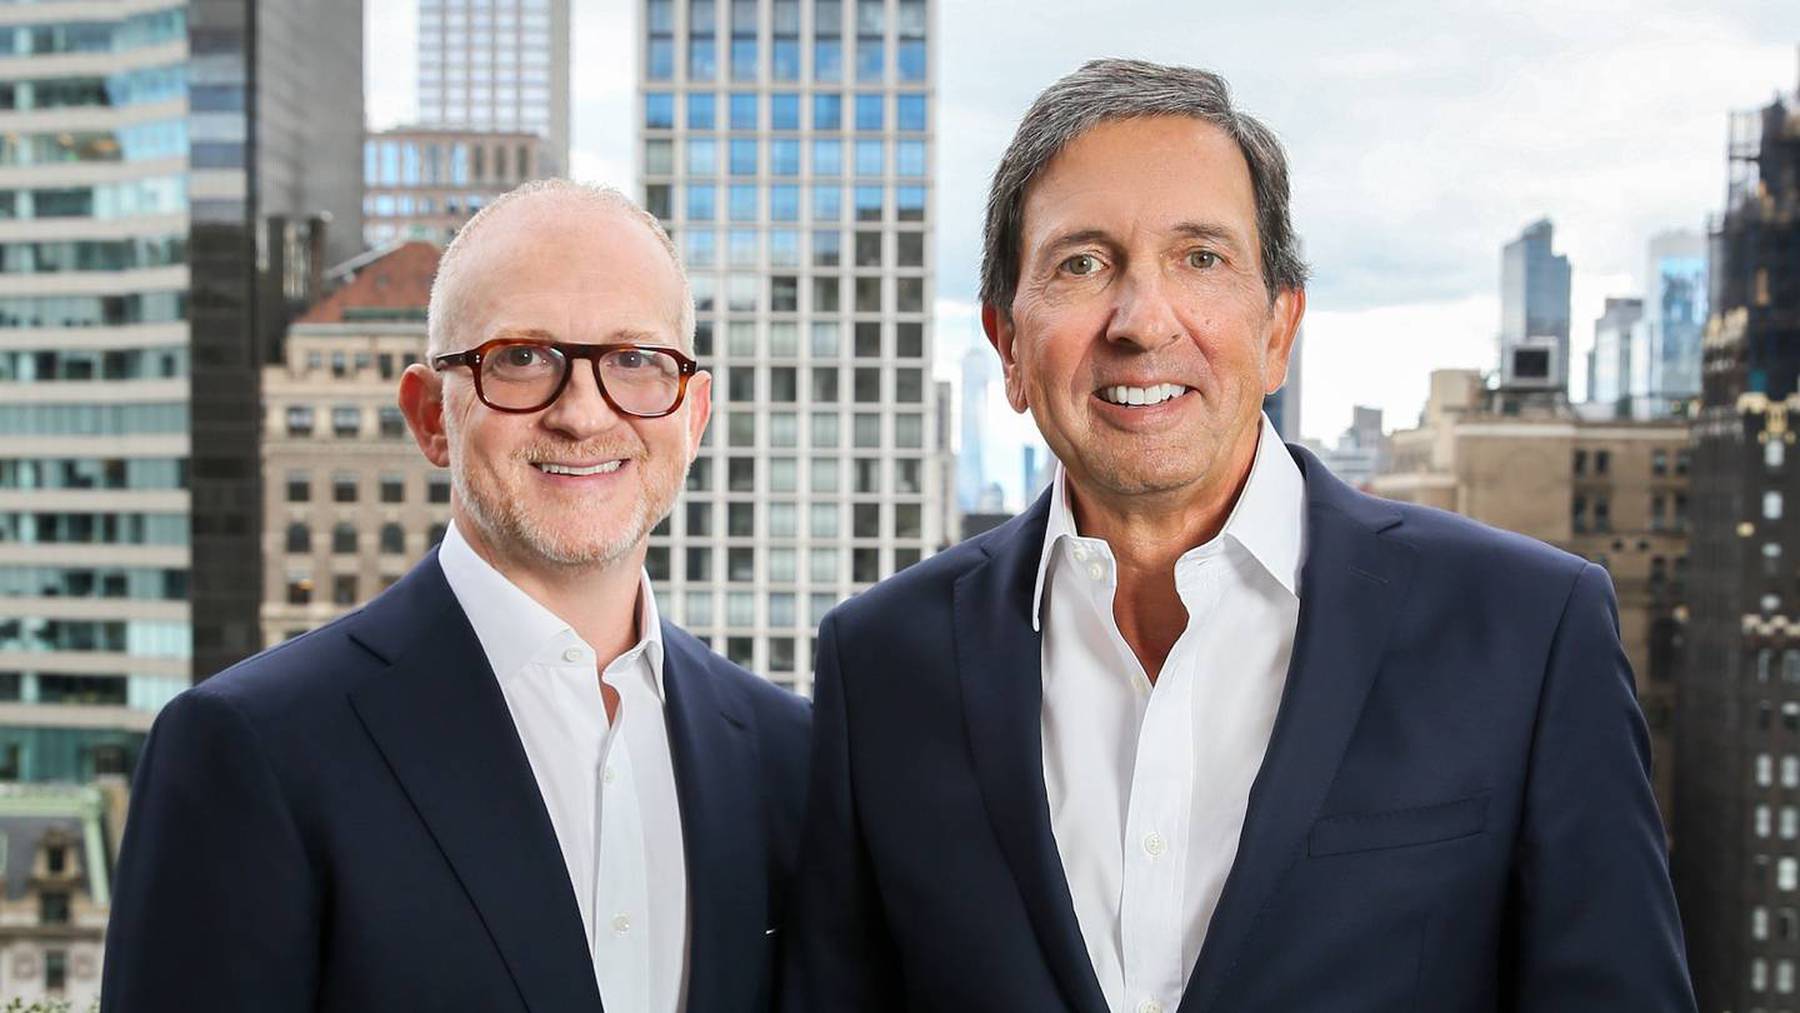 Outgoing Michael Kors CEO Joshua Schulman was slated to succeed Capri CEO John Idol in September 2022.